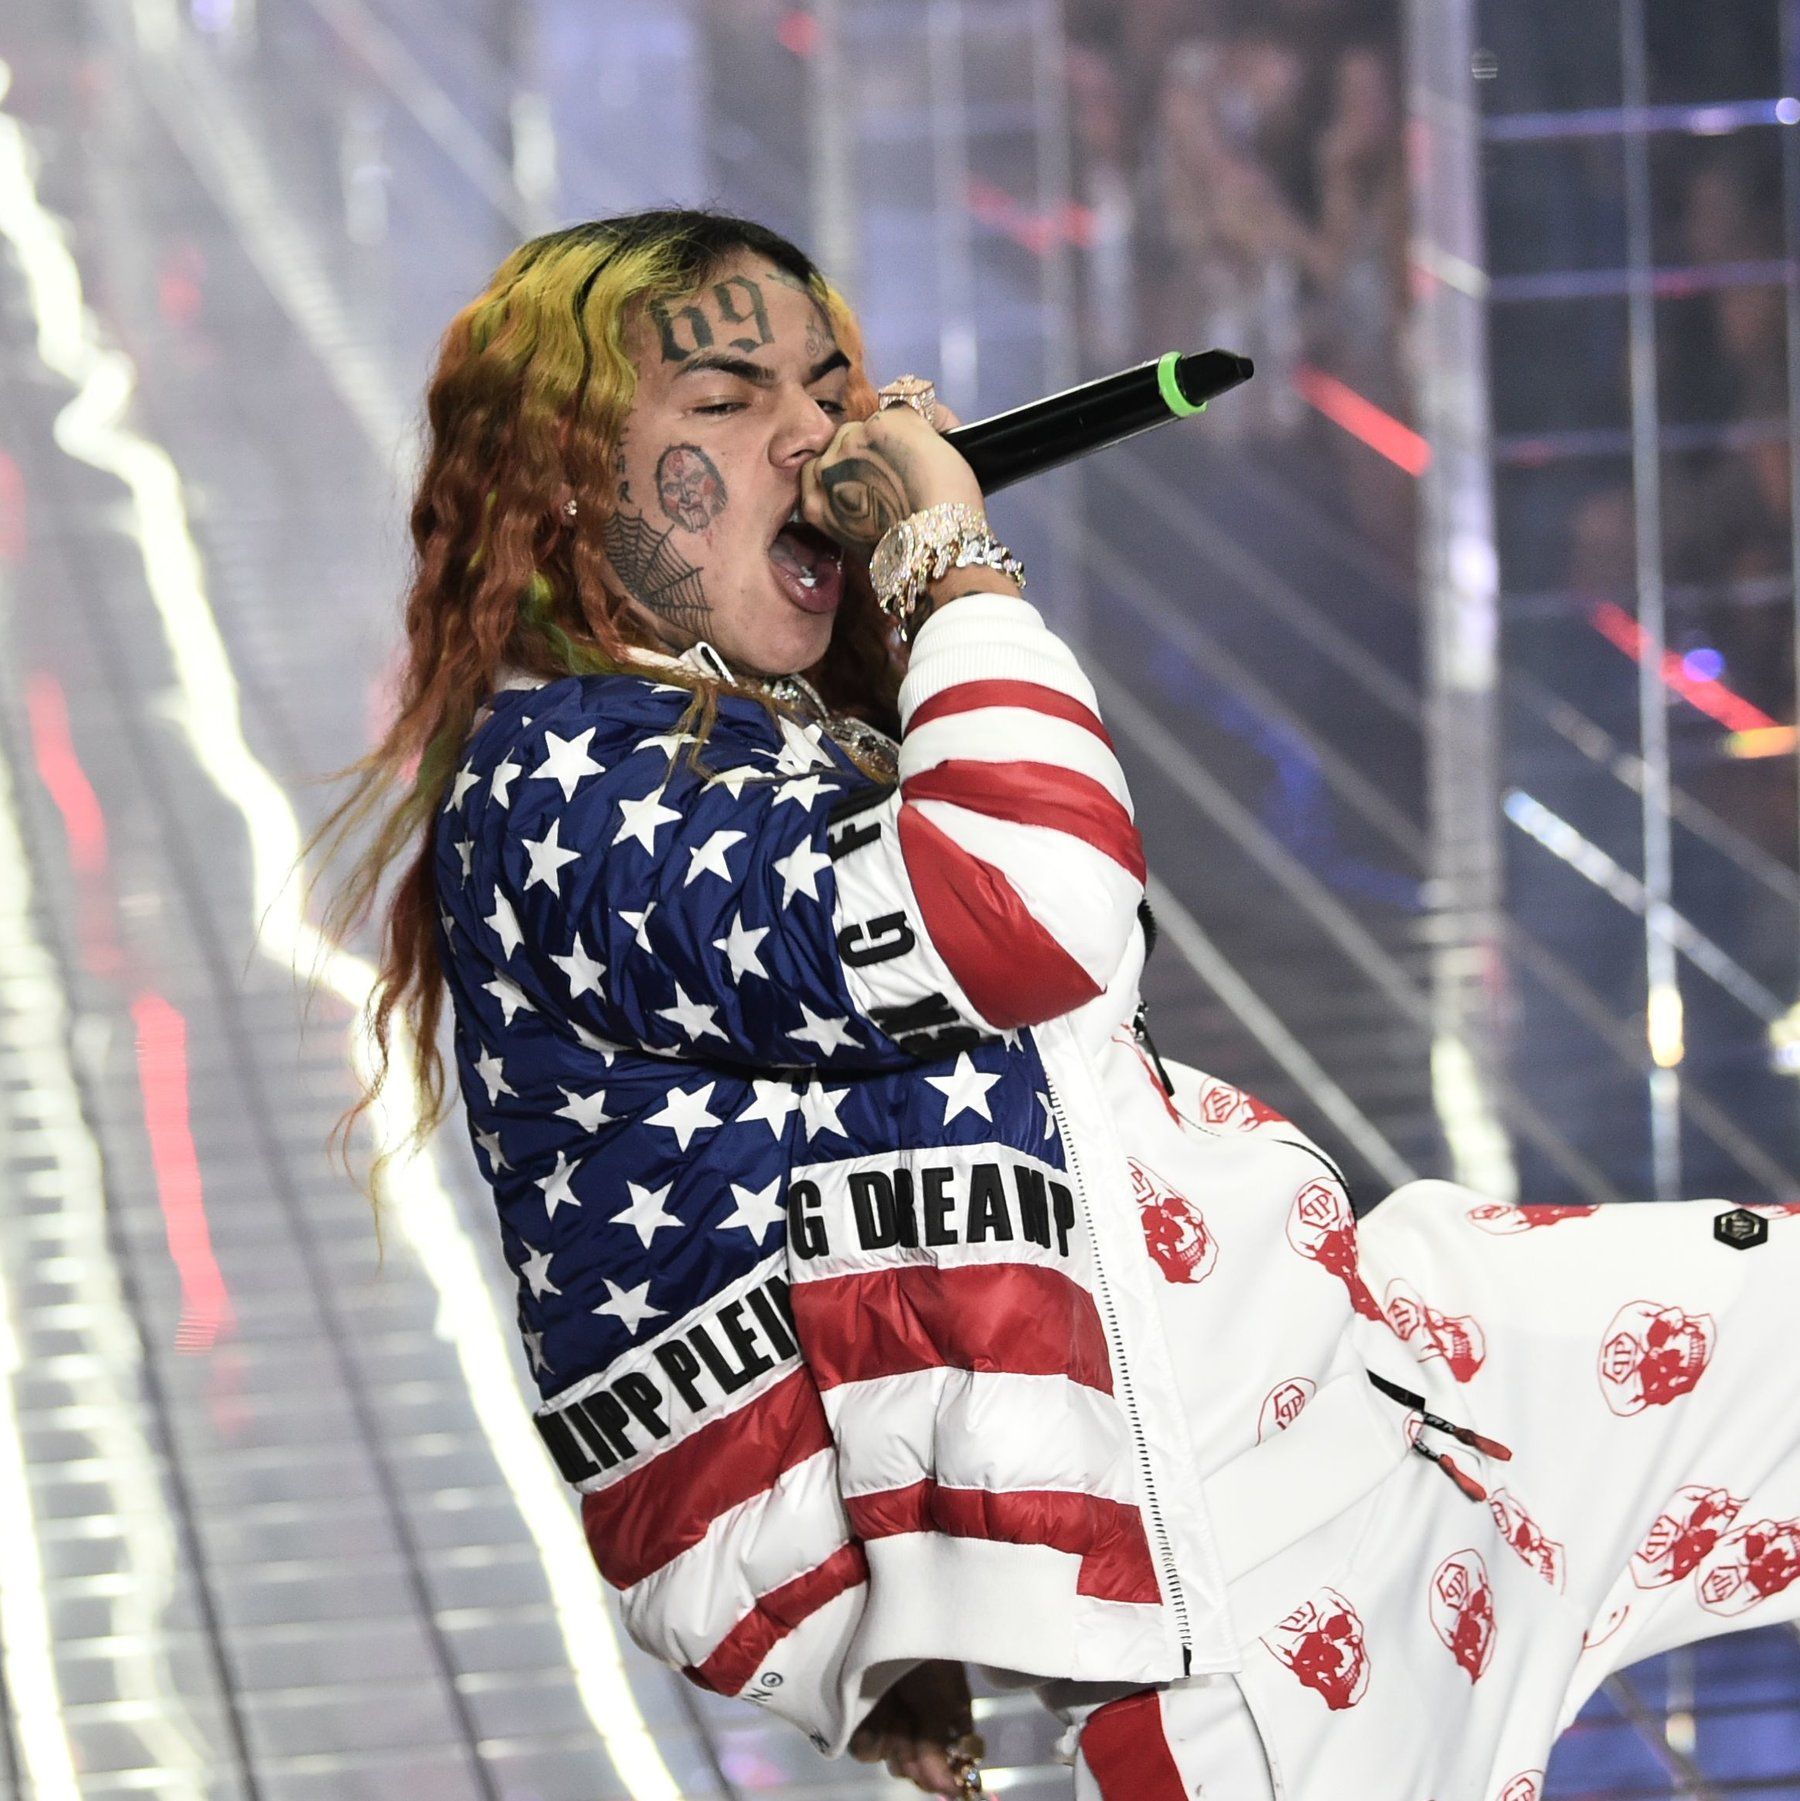 6ix9ine Returns With New Song and Defiant Livestream: 'I Ratted'